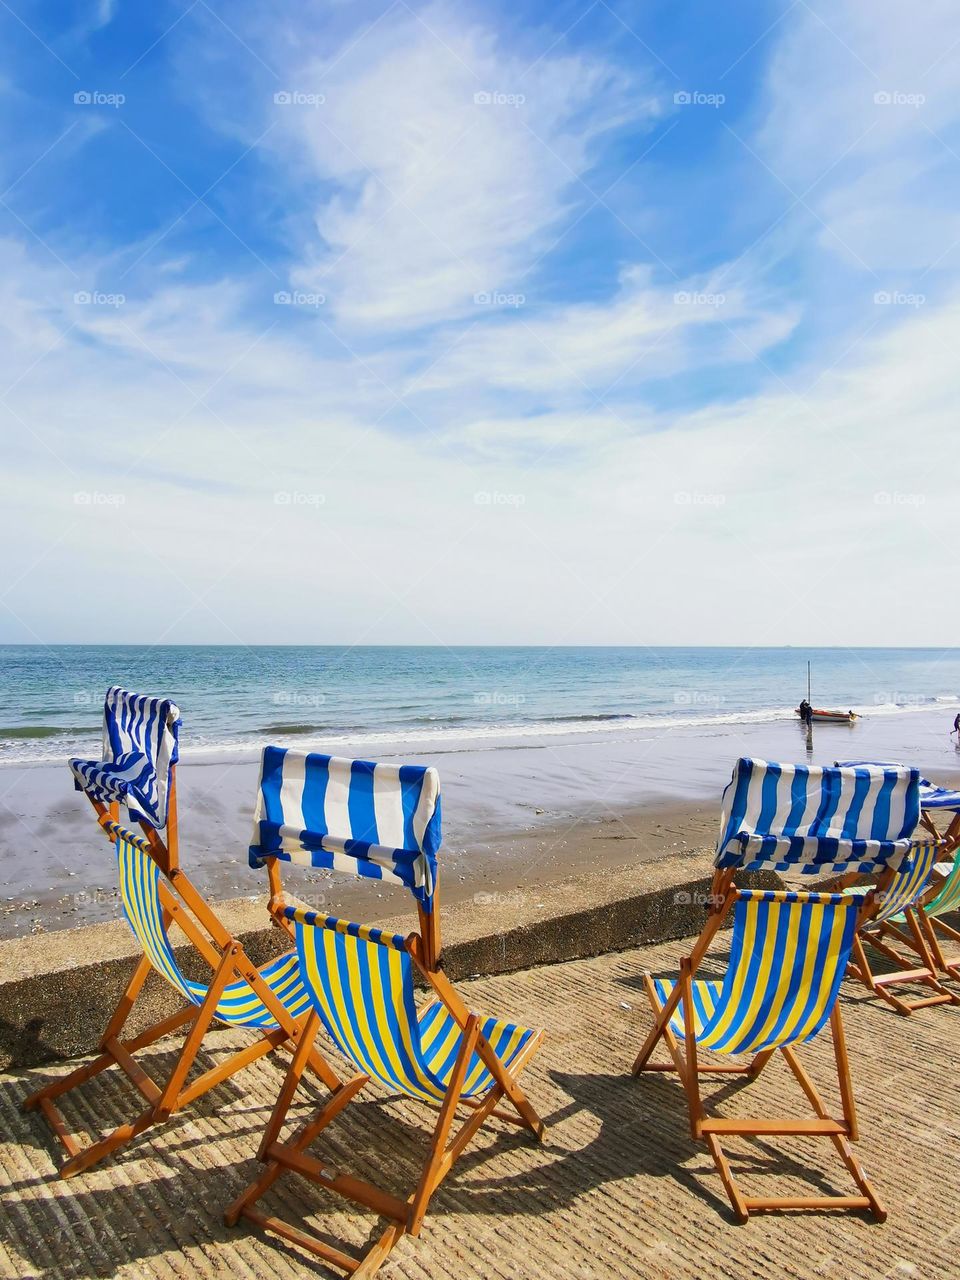 The first sunny spring days. Sea shore. Chairs for relaxation and sunbathing are waiting for vacationers. April in England. Beach. The beach season will start soon.